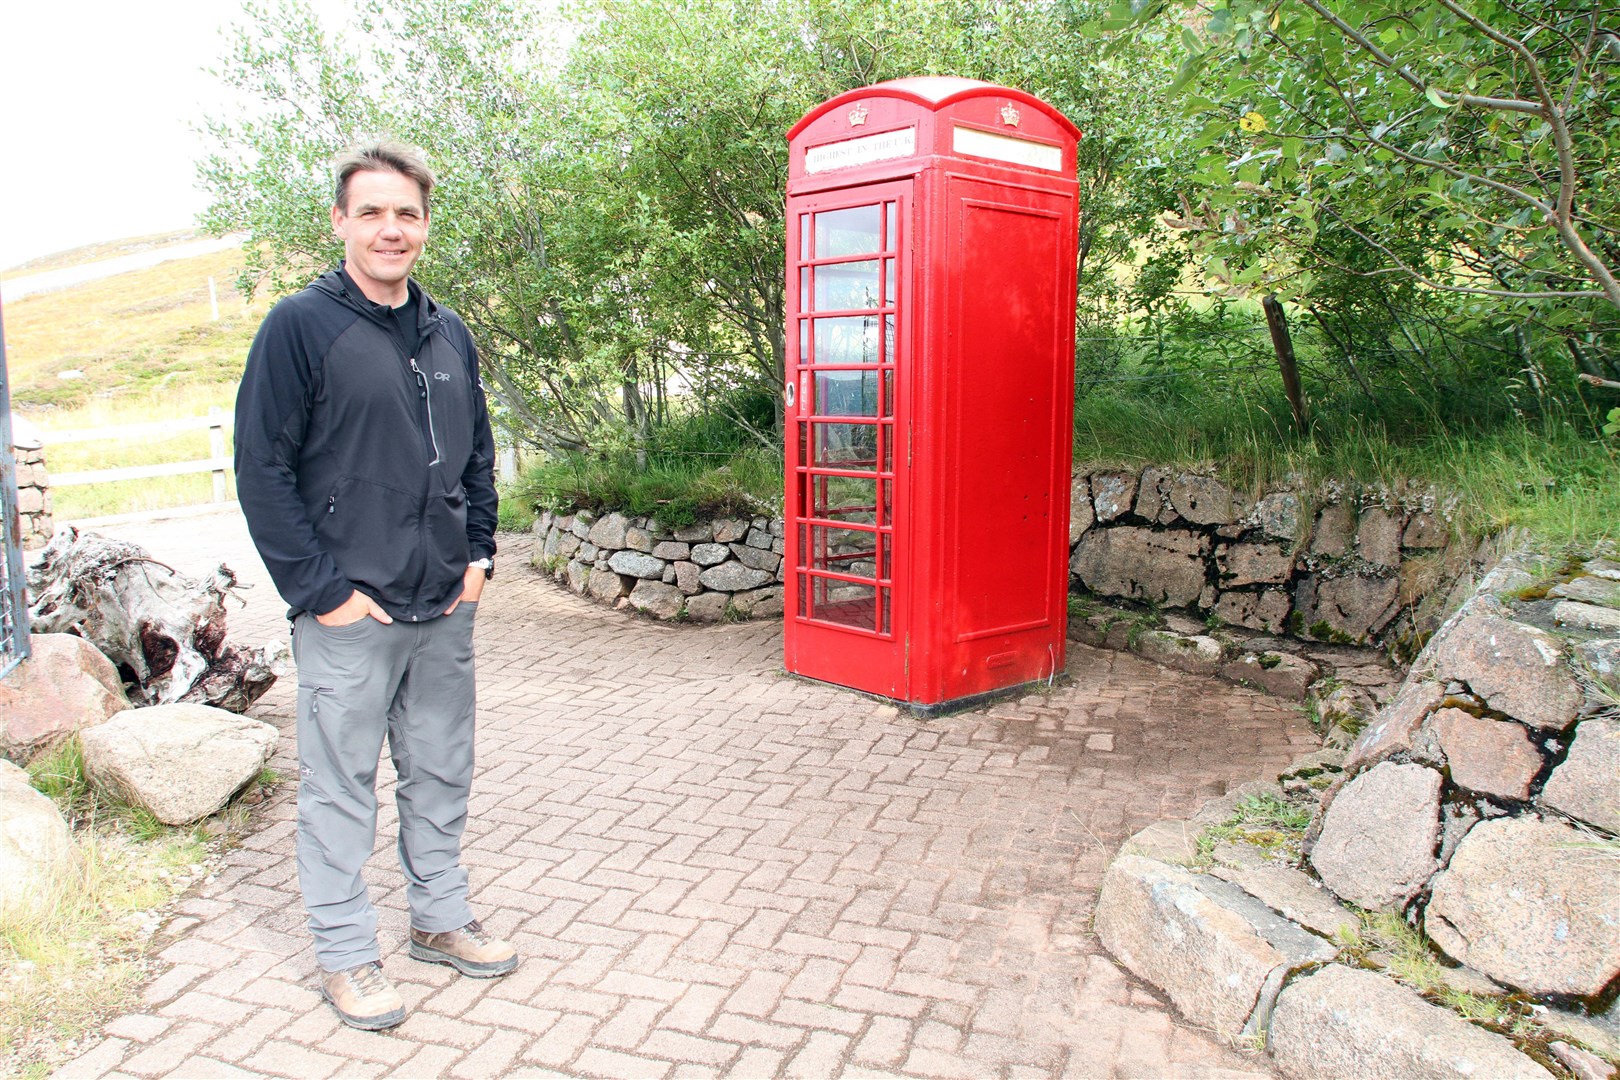 Cairngorm ranger Ruari Macdonald with the red public phone box - the highest in the UK - at Cairngorm Mountain.